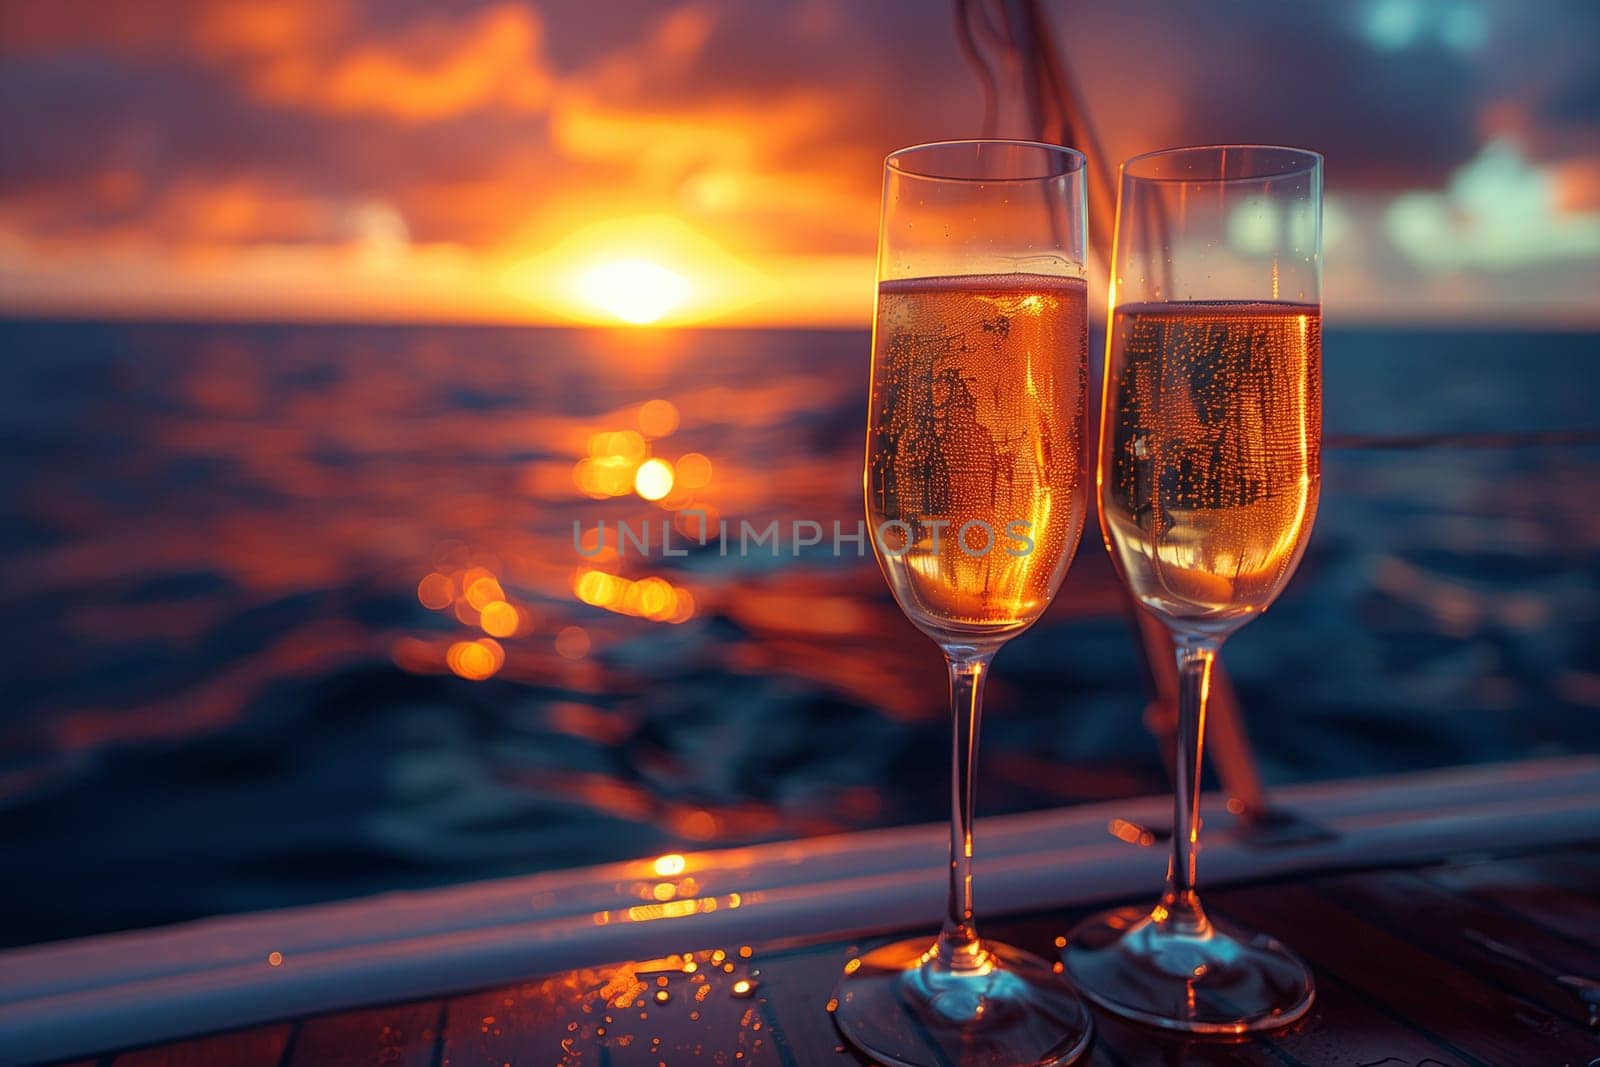 Two glasses filled with champagne placed on a wooden table, ready to be enjoyed.